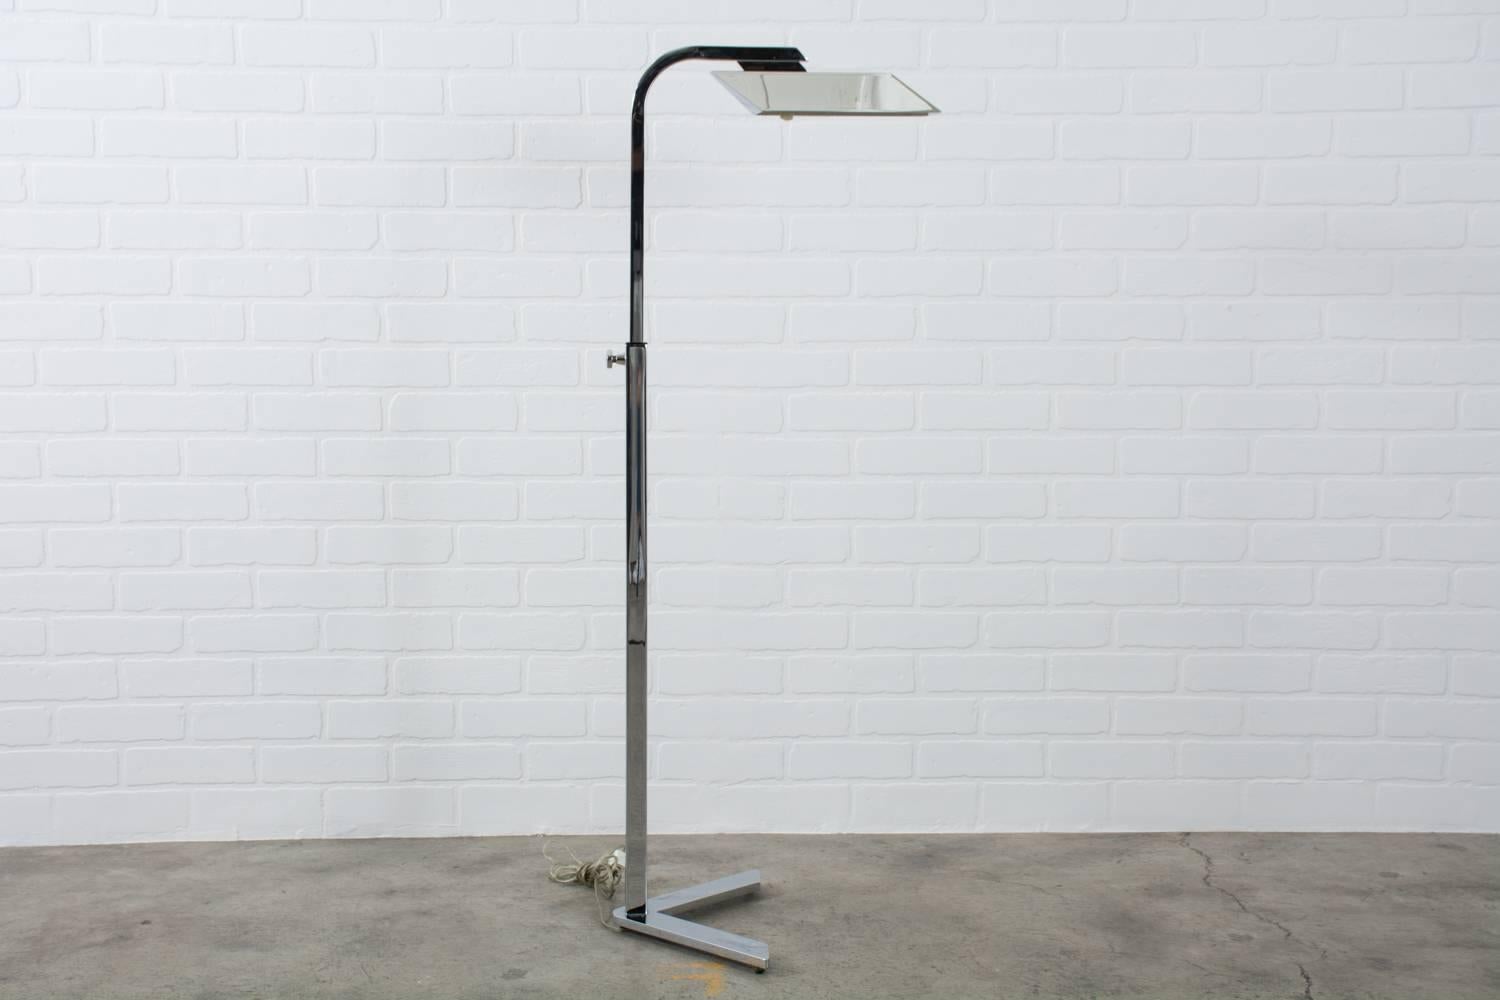 This Mid-Century Modern adjustable floor lamp was designed by Charles Hollis Jones in the 1970s, USA. It is constructed of chrome plated steel and has a 'V' base. The height can be adjusted from approximately 36 inches high to 48 inches high. Dimmer